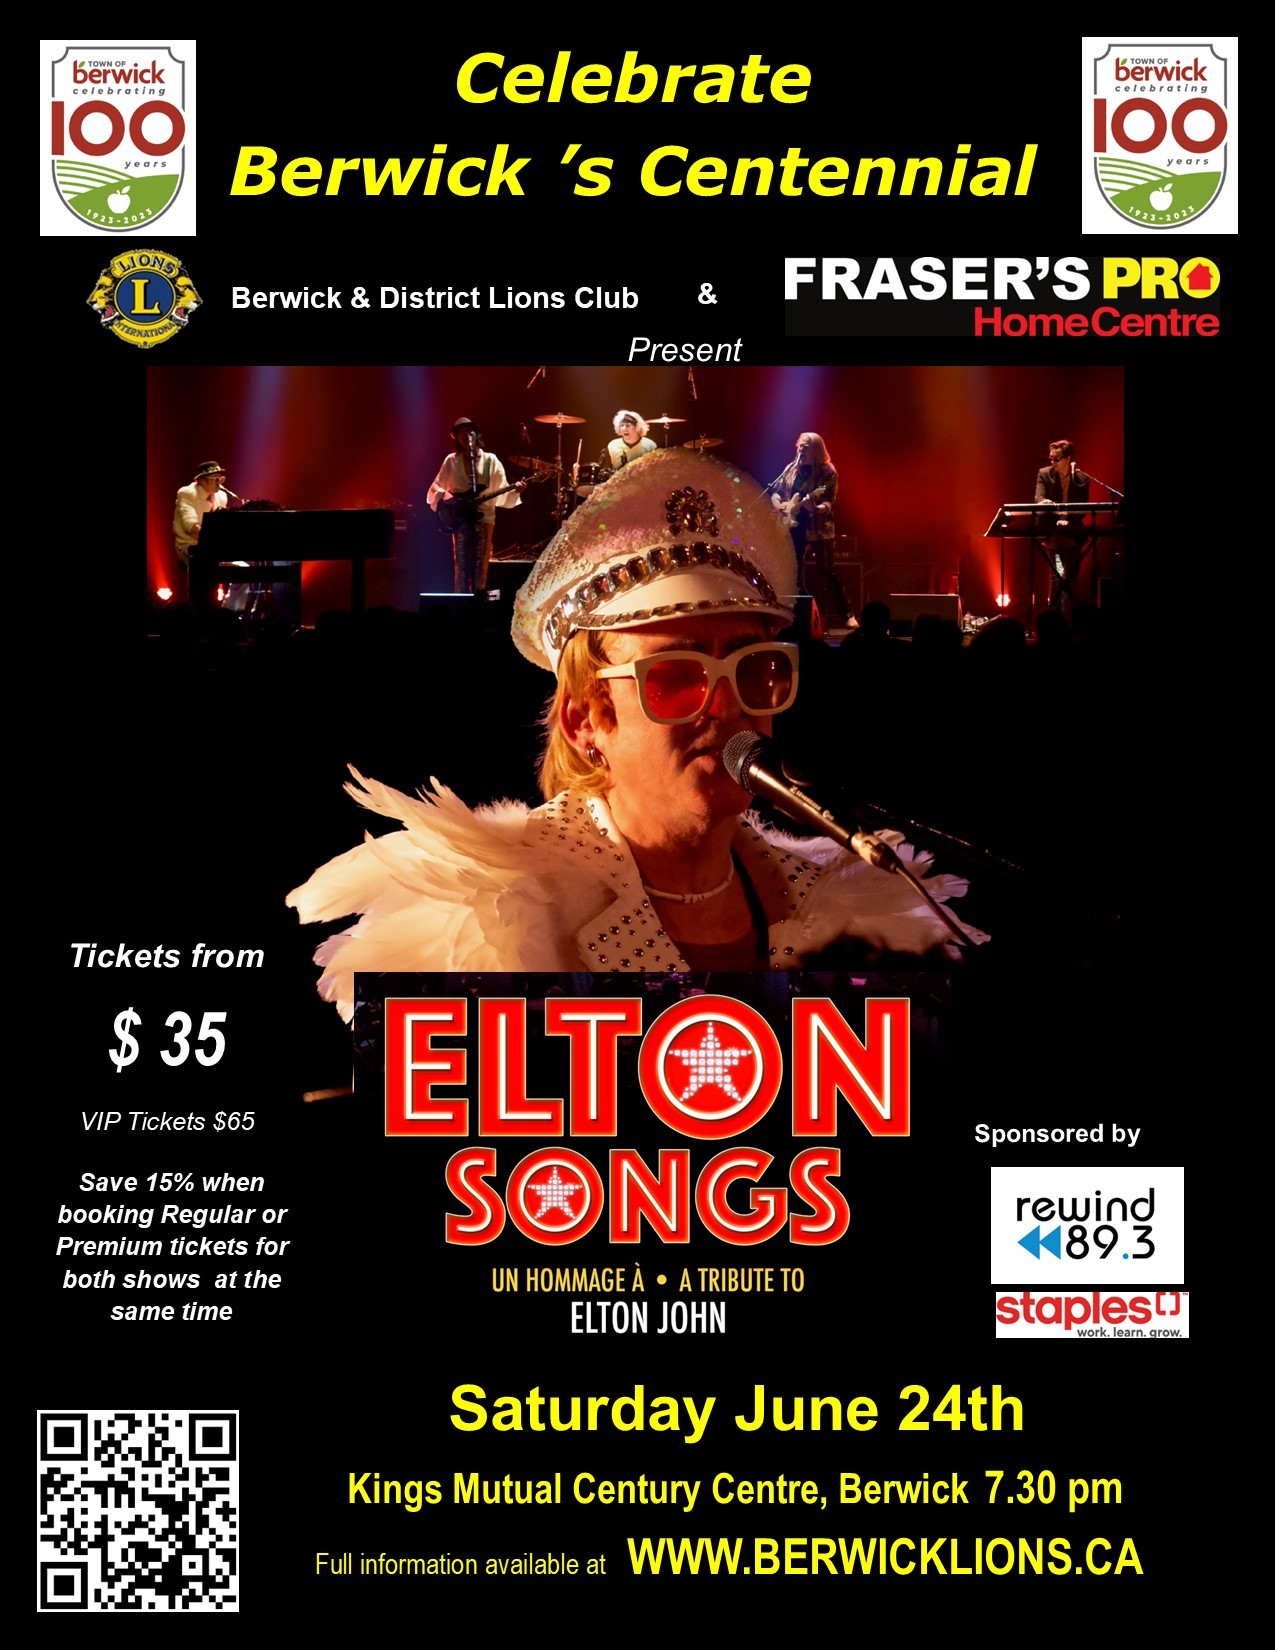 Elton Songs in Concert A tribute to Elton John. Celebrating Berwick's Centennial on Jun 24, 19:30@Kings Mutual Century Centre - Pick a seat, Buy tickets and Get information on Berwick Lions Concert 